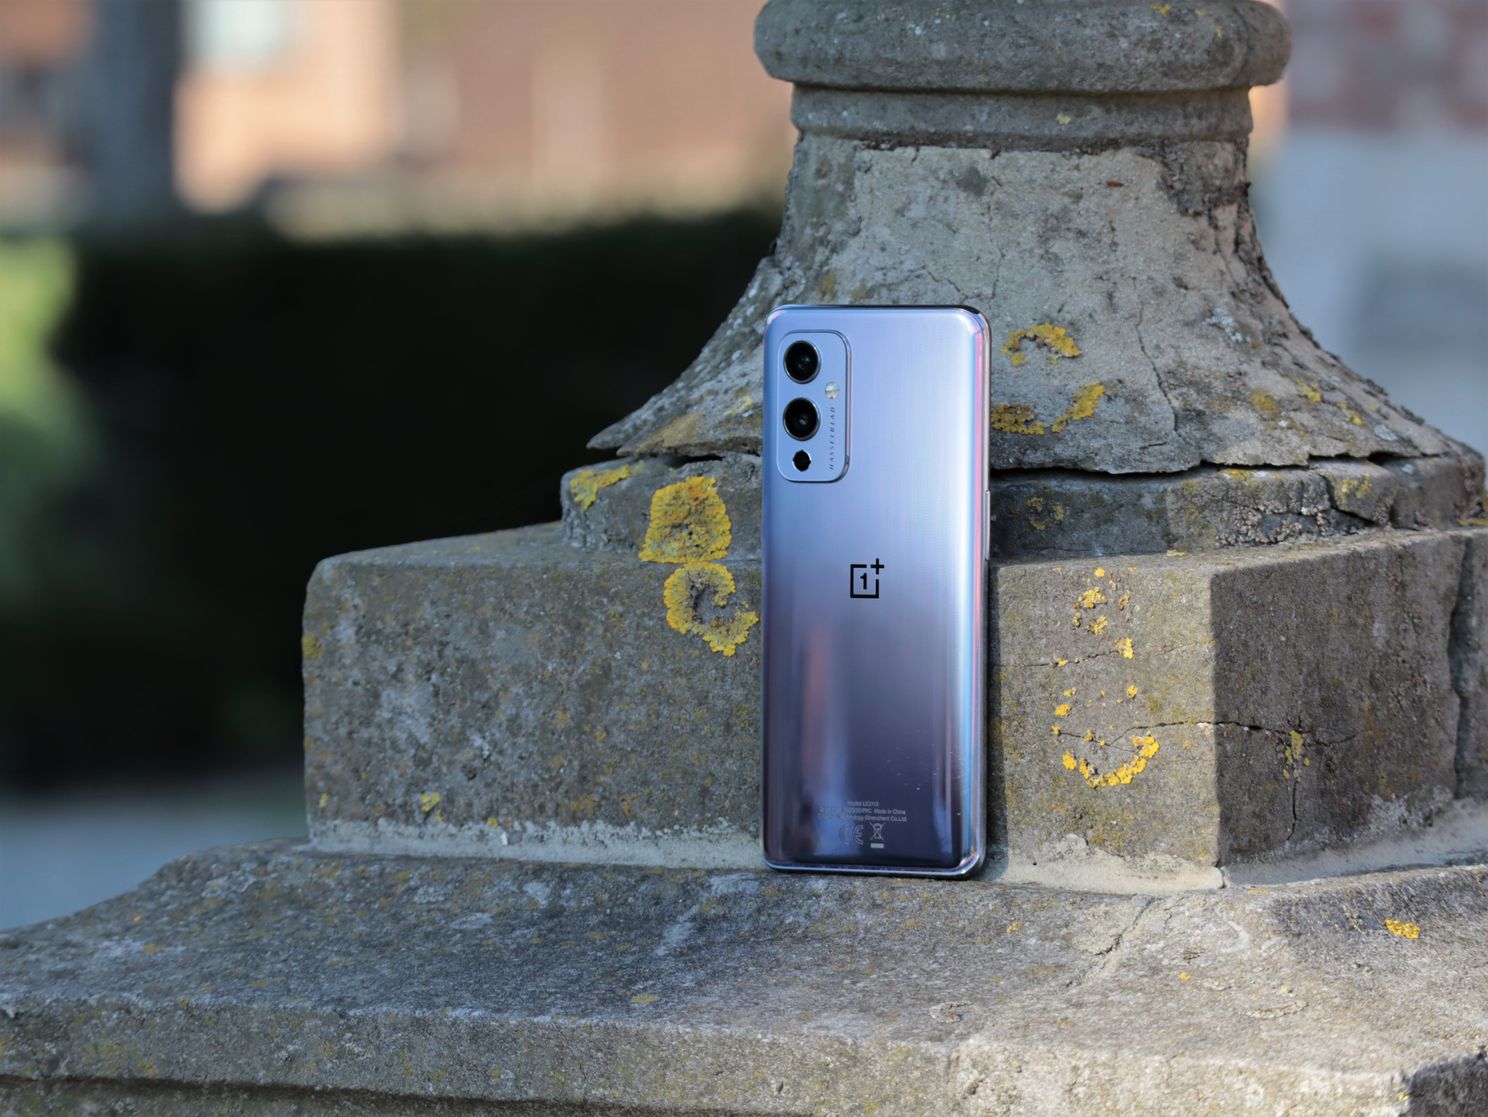 Oneplus 9 review